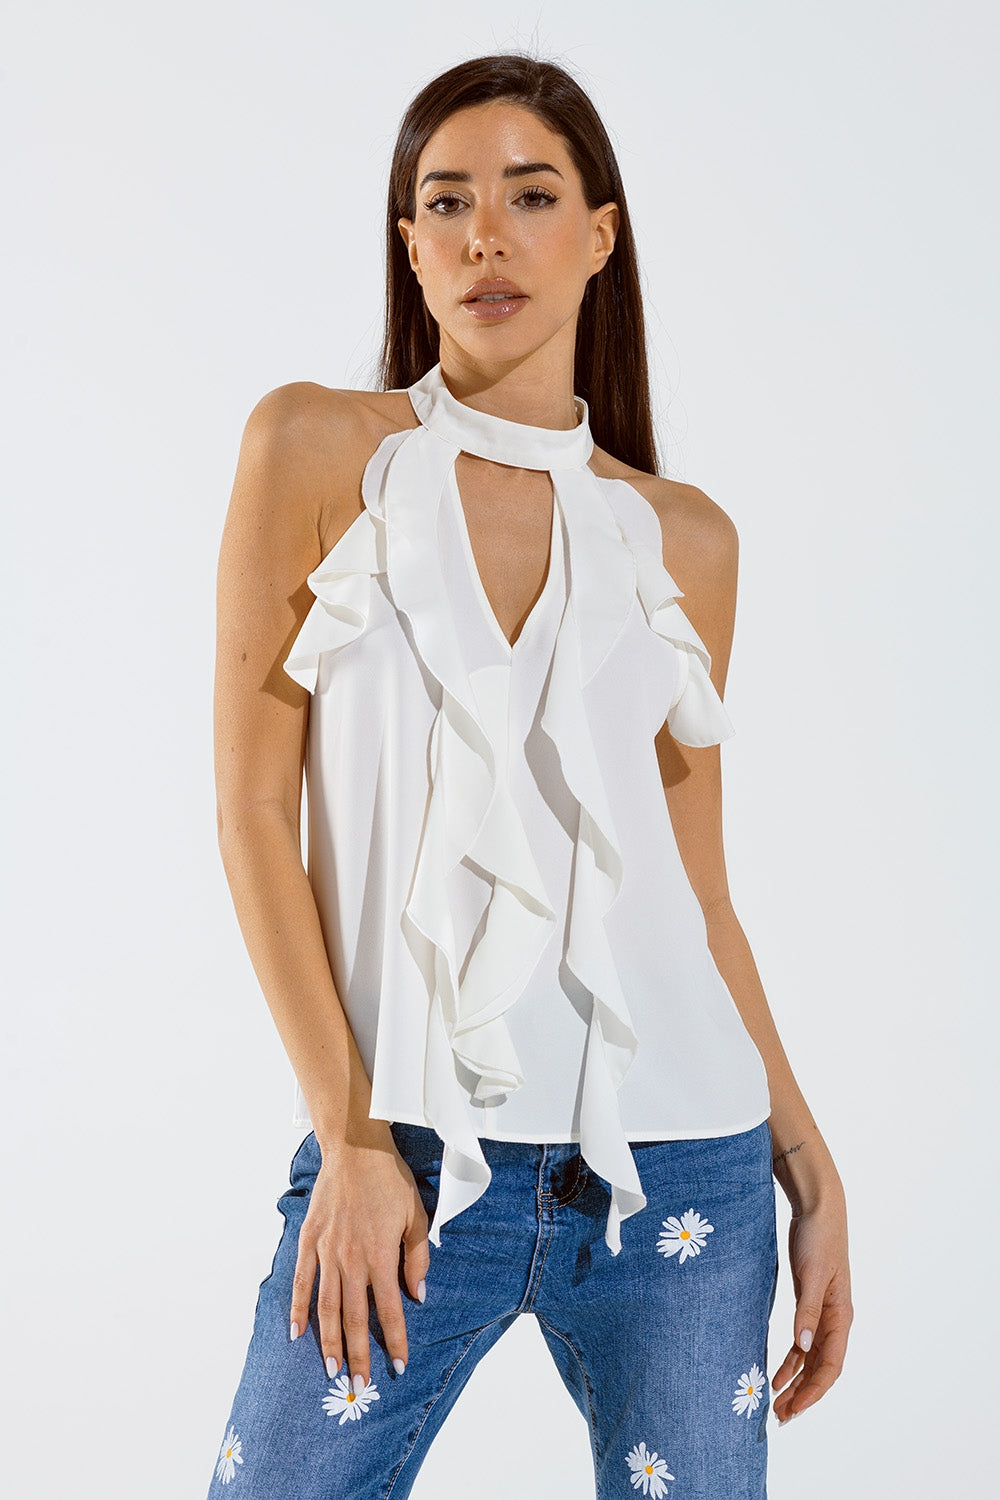 Q2 Sleeveless White Top with Ruffled Details and High Neck